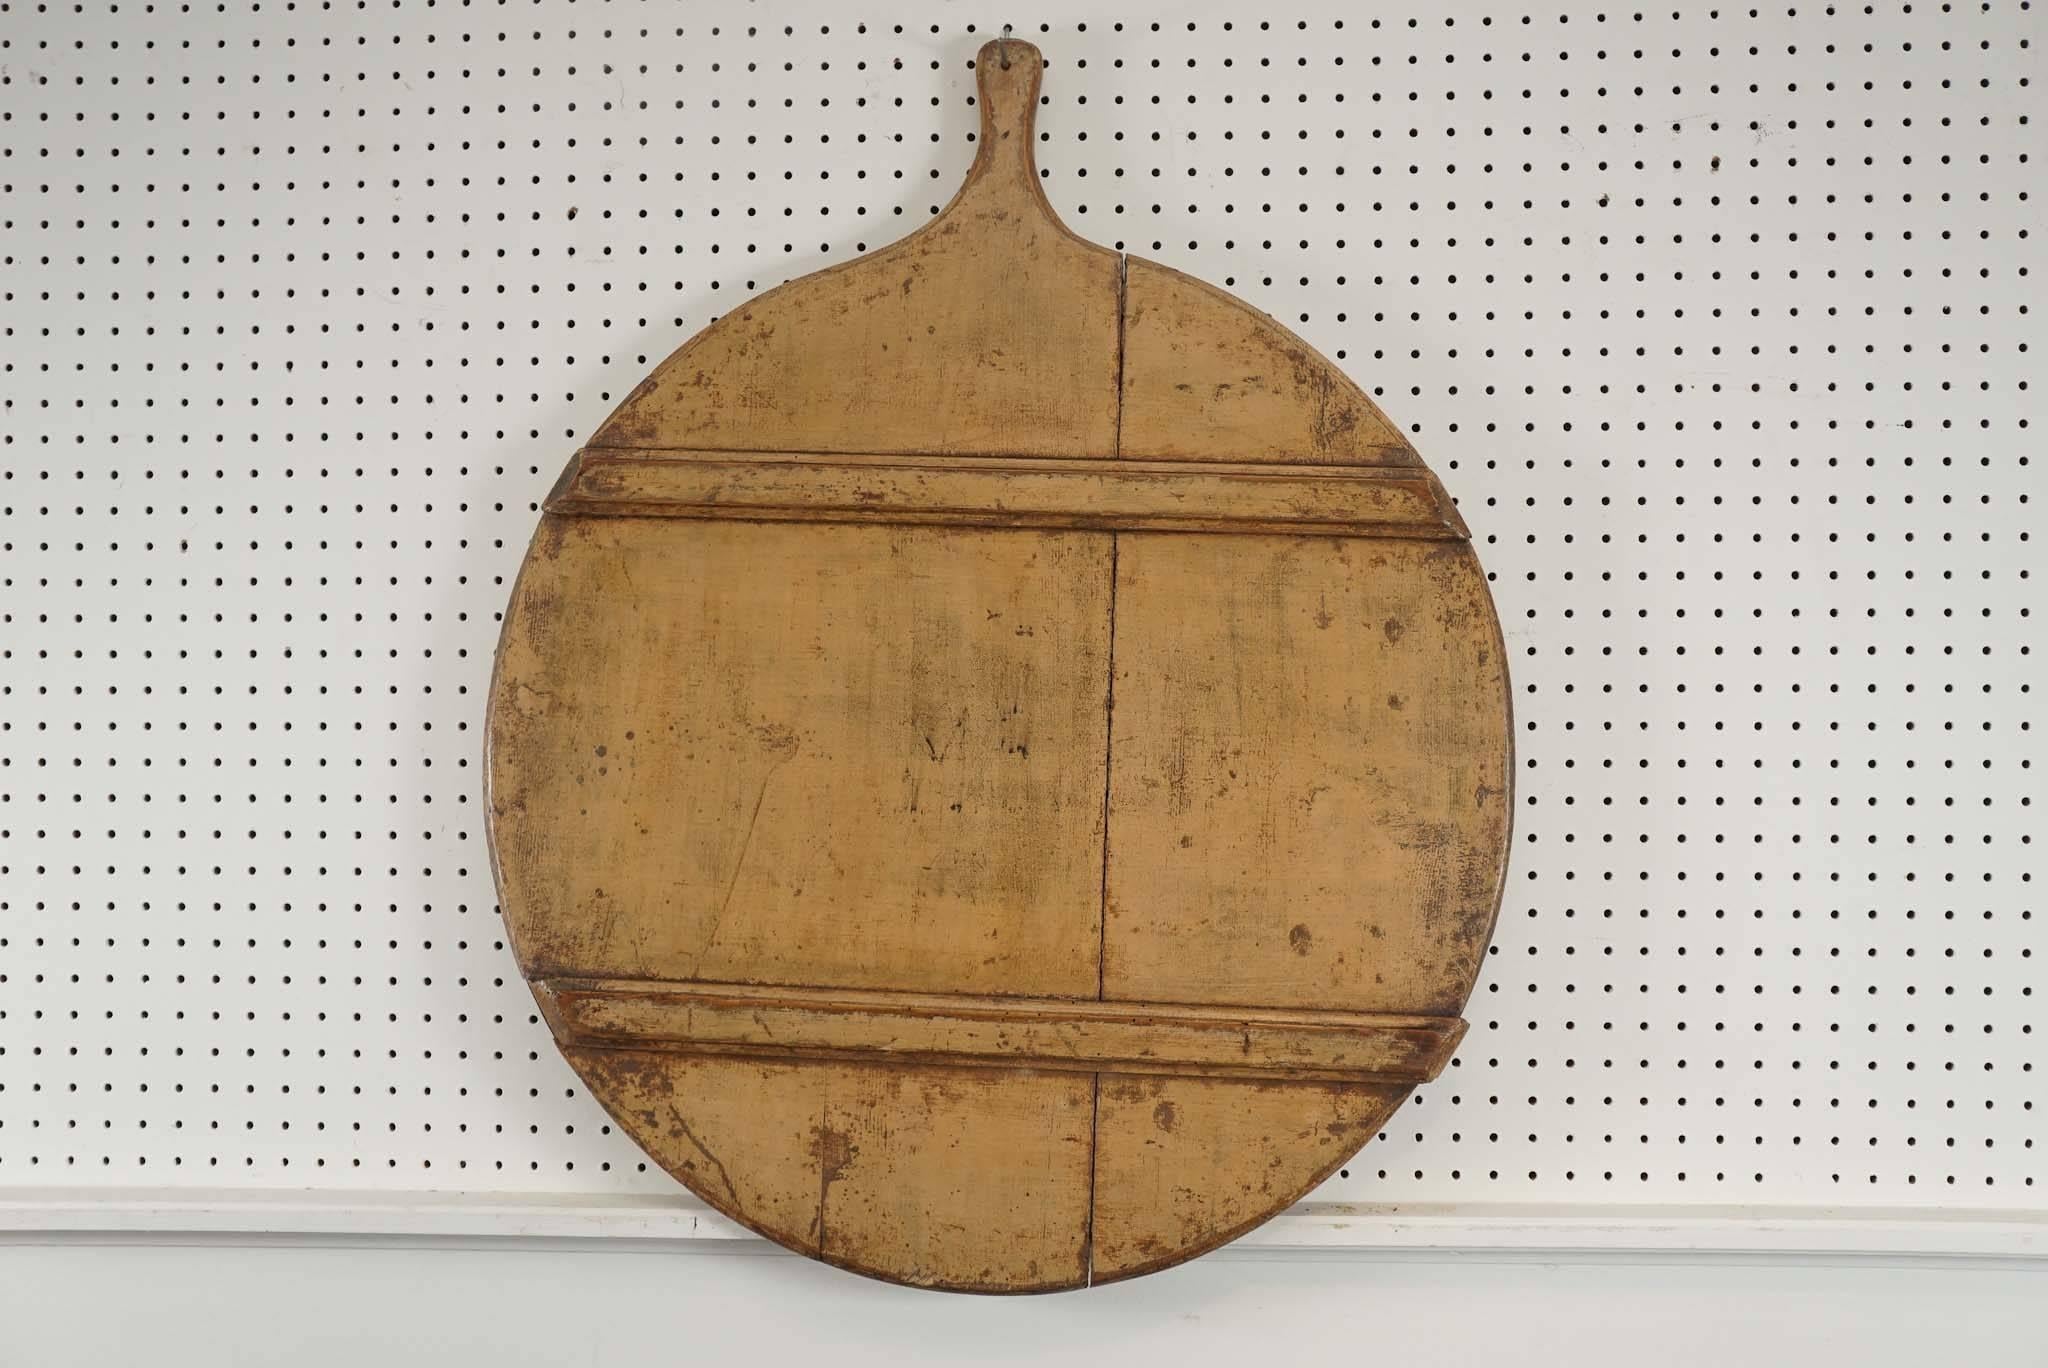 These boards were used to peel potatoes. The runners you see showing actually was the bottom of the peel board but for display it looks more interesting with the runners showing. The other side is perfectly flat. The patina is wonderful and there